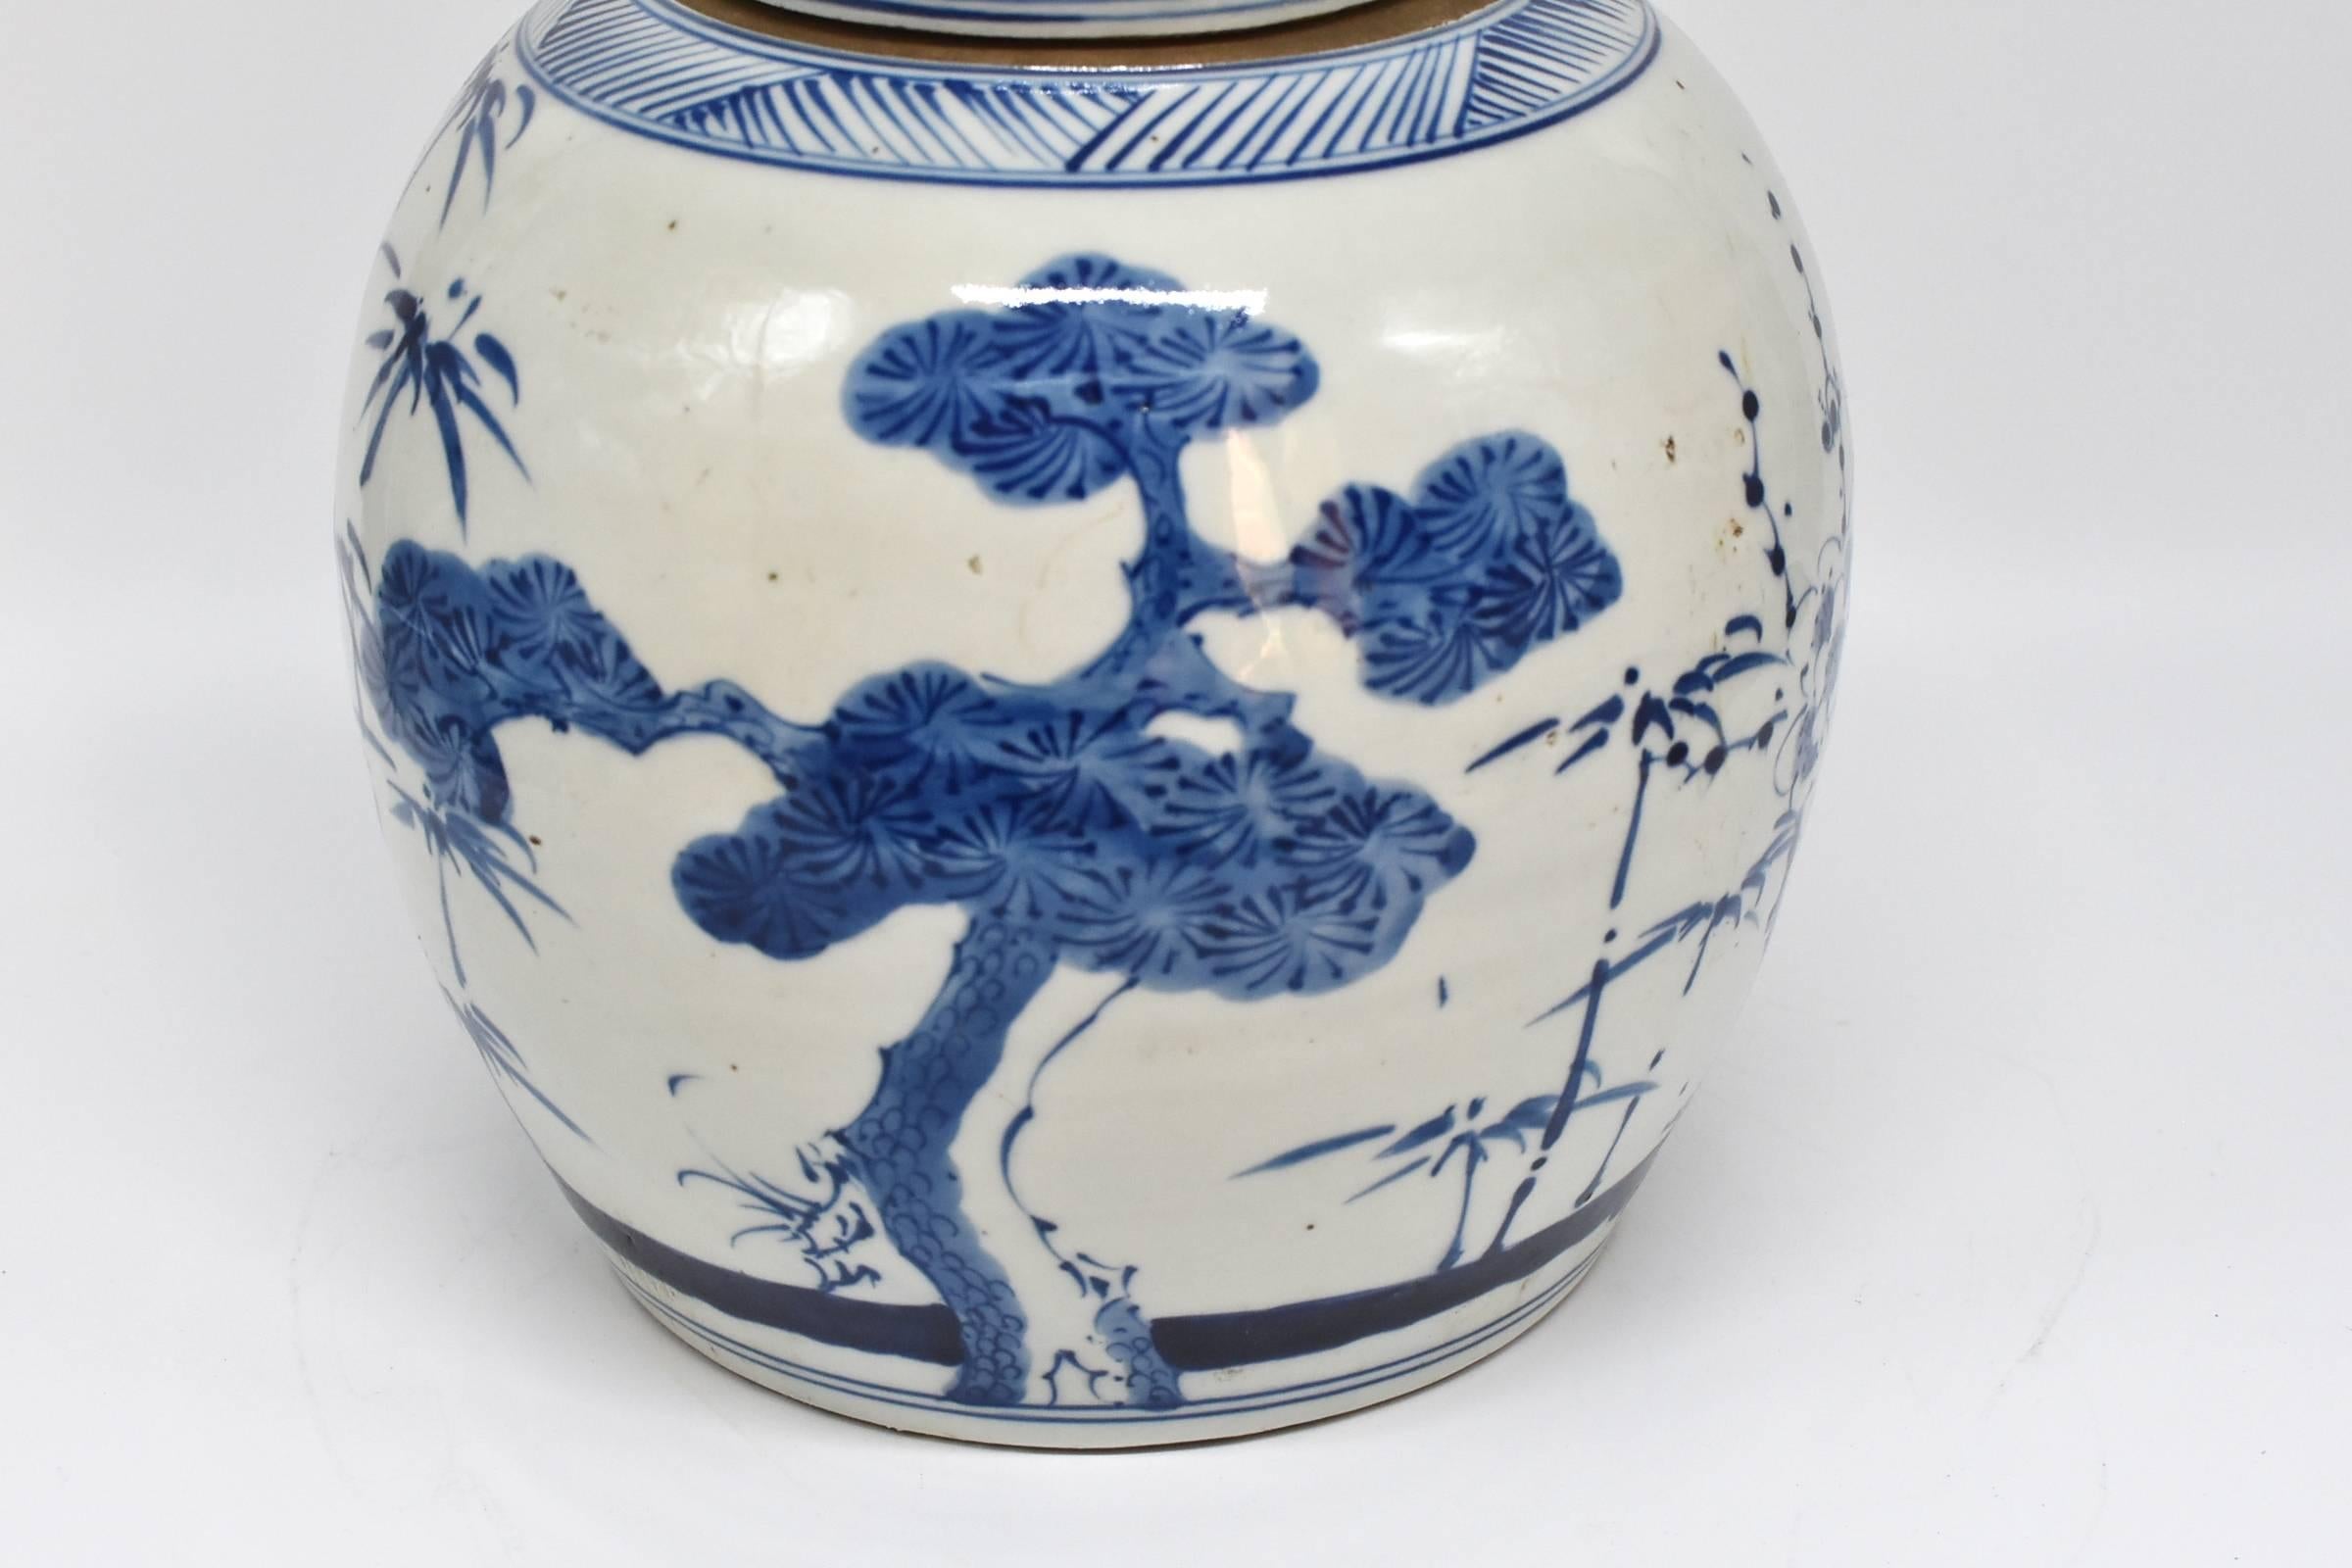 A beautiful 20th century Chinese blue and white ginger jar with hand-painted images of bamboo and pine trees. They symbolize advancement and longevity. The blue and white is a Classic color that is timeless. The colors on these pieces are beautiful